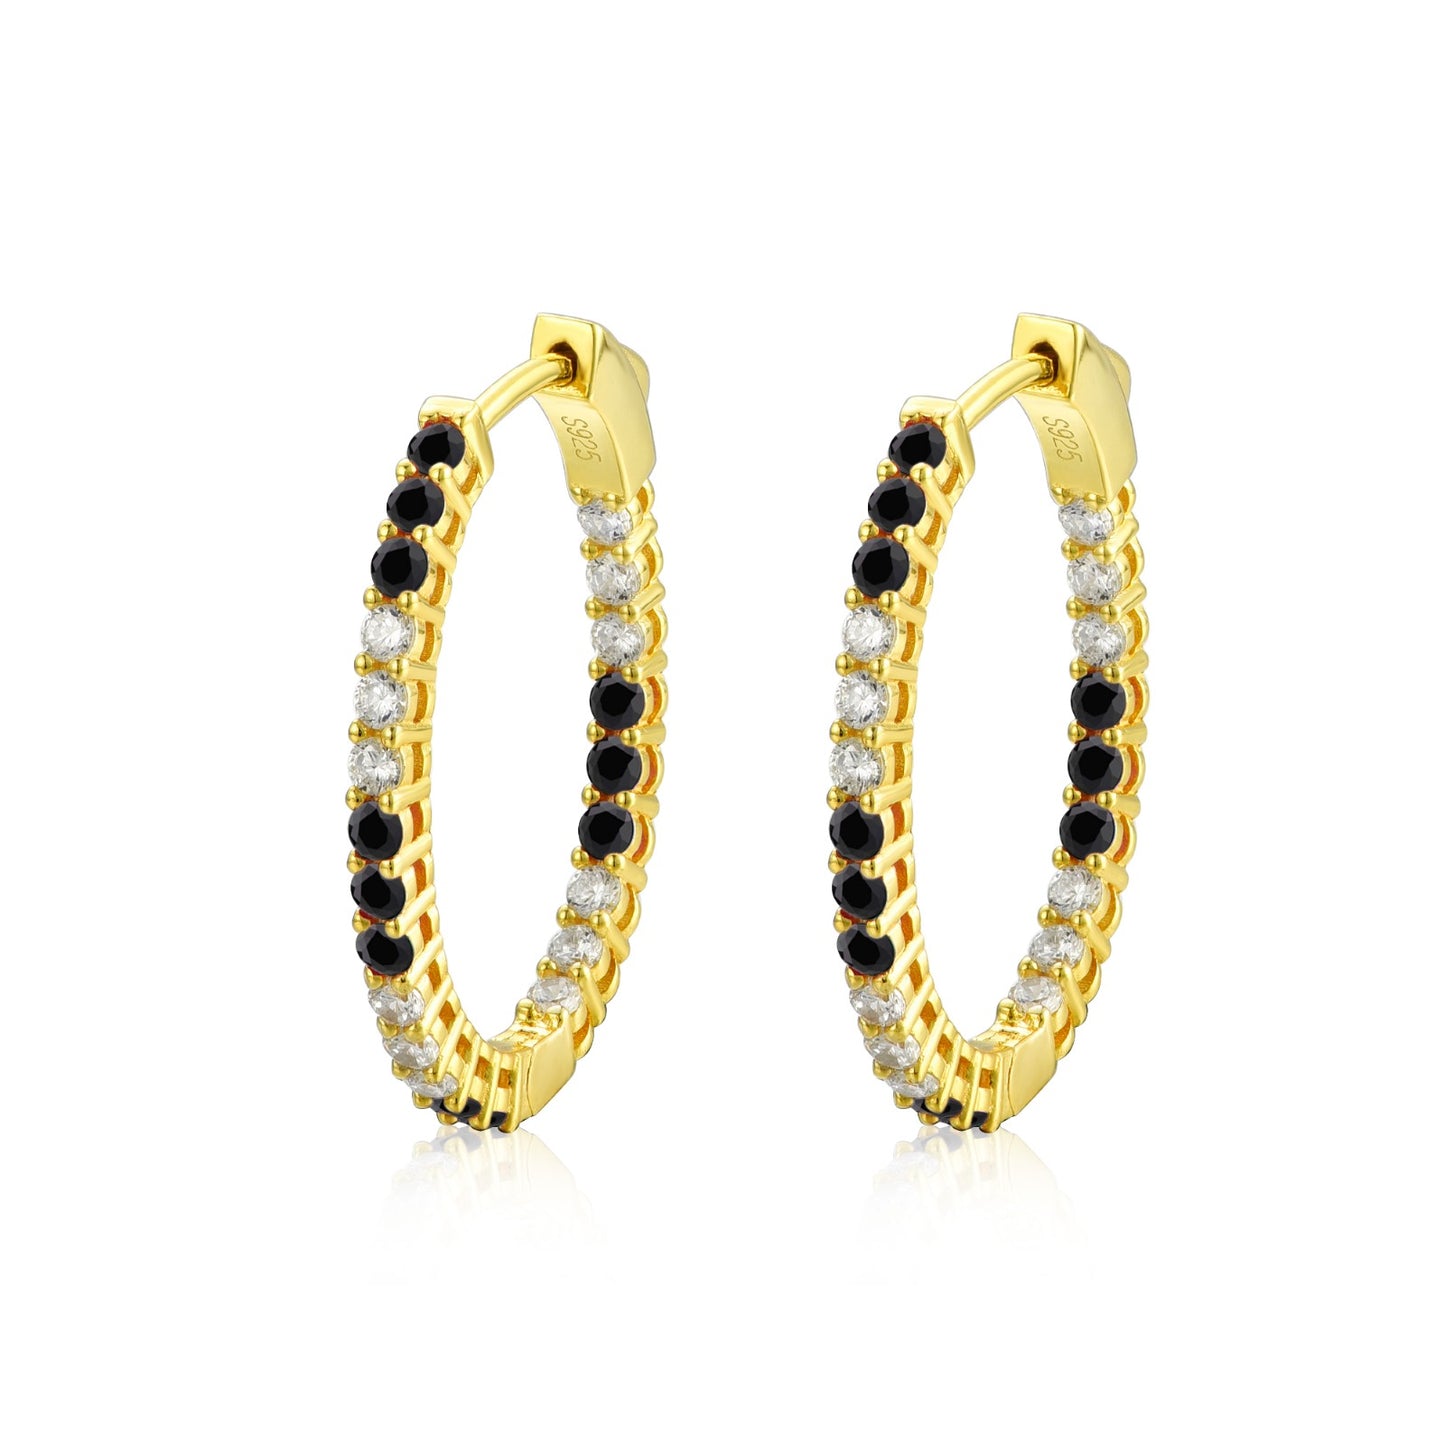 Oval Uniquely Colored Hoops